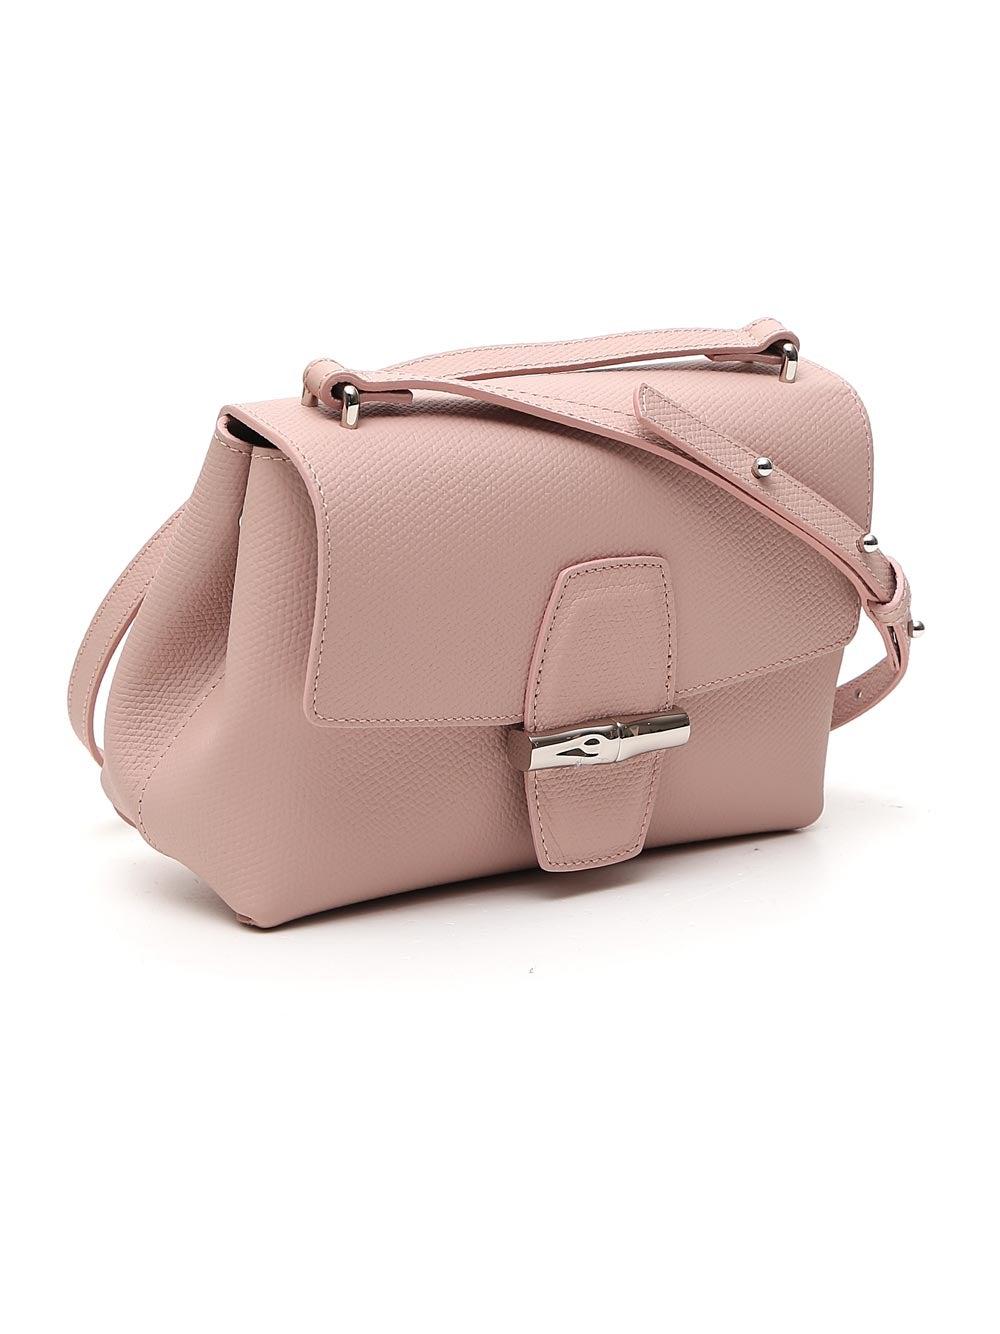 Small but mighty: Longchamp's miniature Roseau bags are proof that micro  bags are here to stay